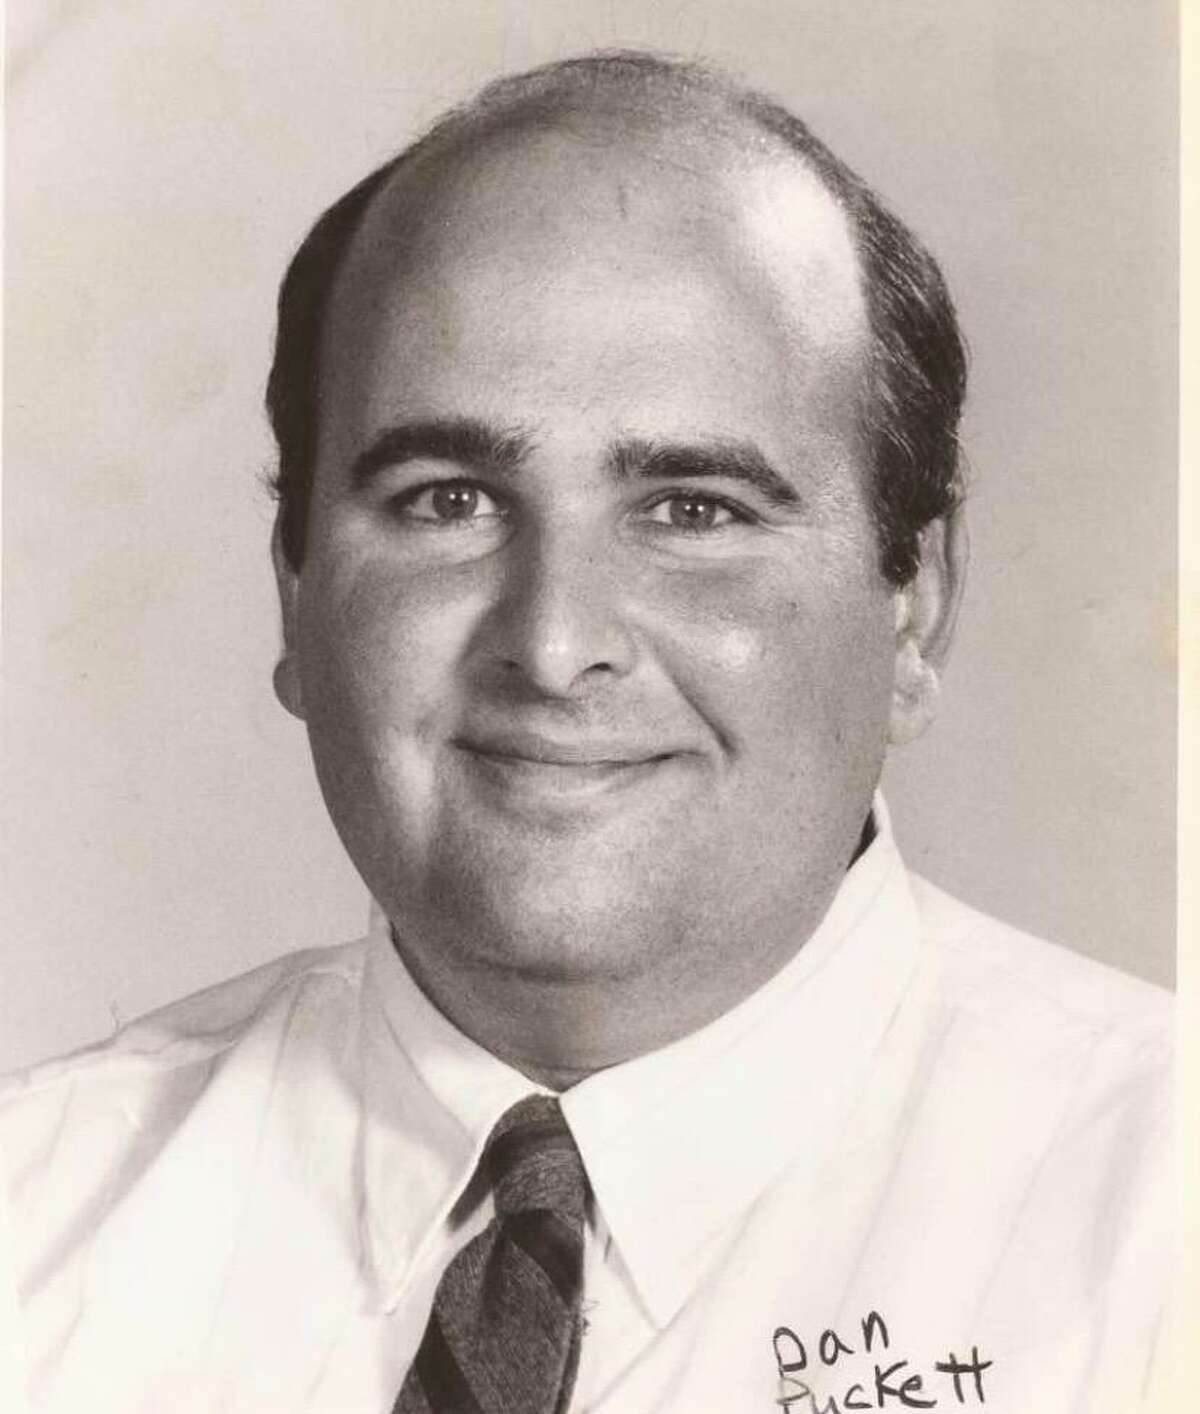 Daniel Puckett was a voracious reader, a bright mind and a meticulous copy editor at newspapers in Texas and Florida, his family and former colleagues said.